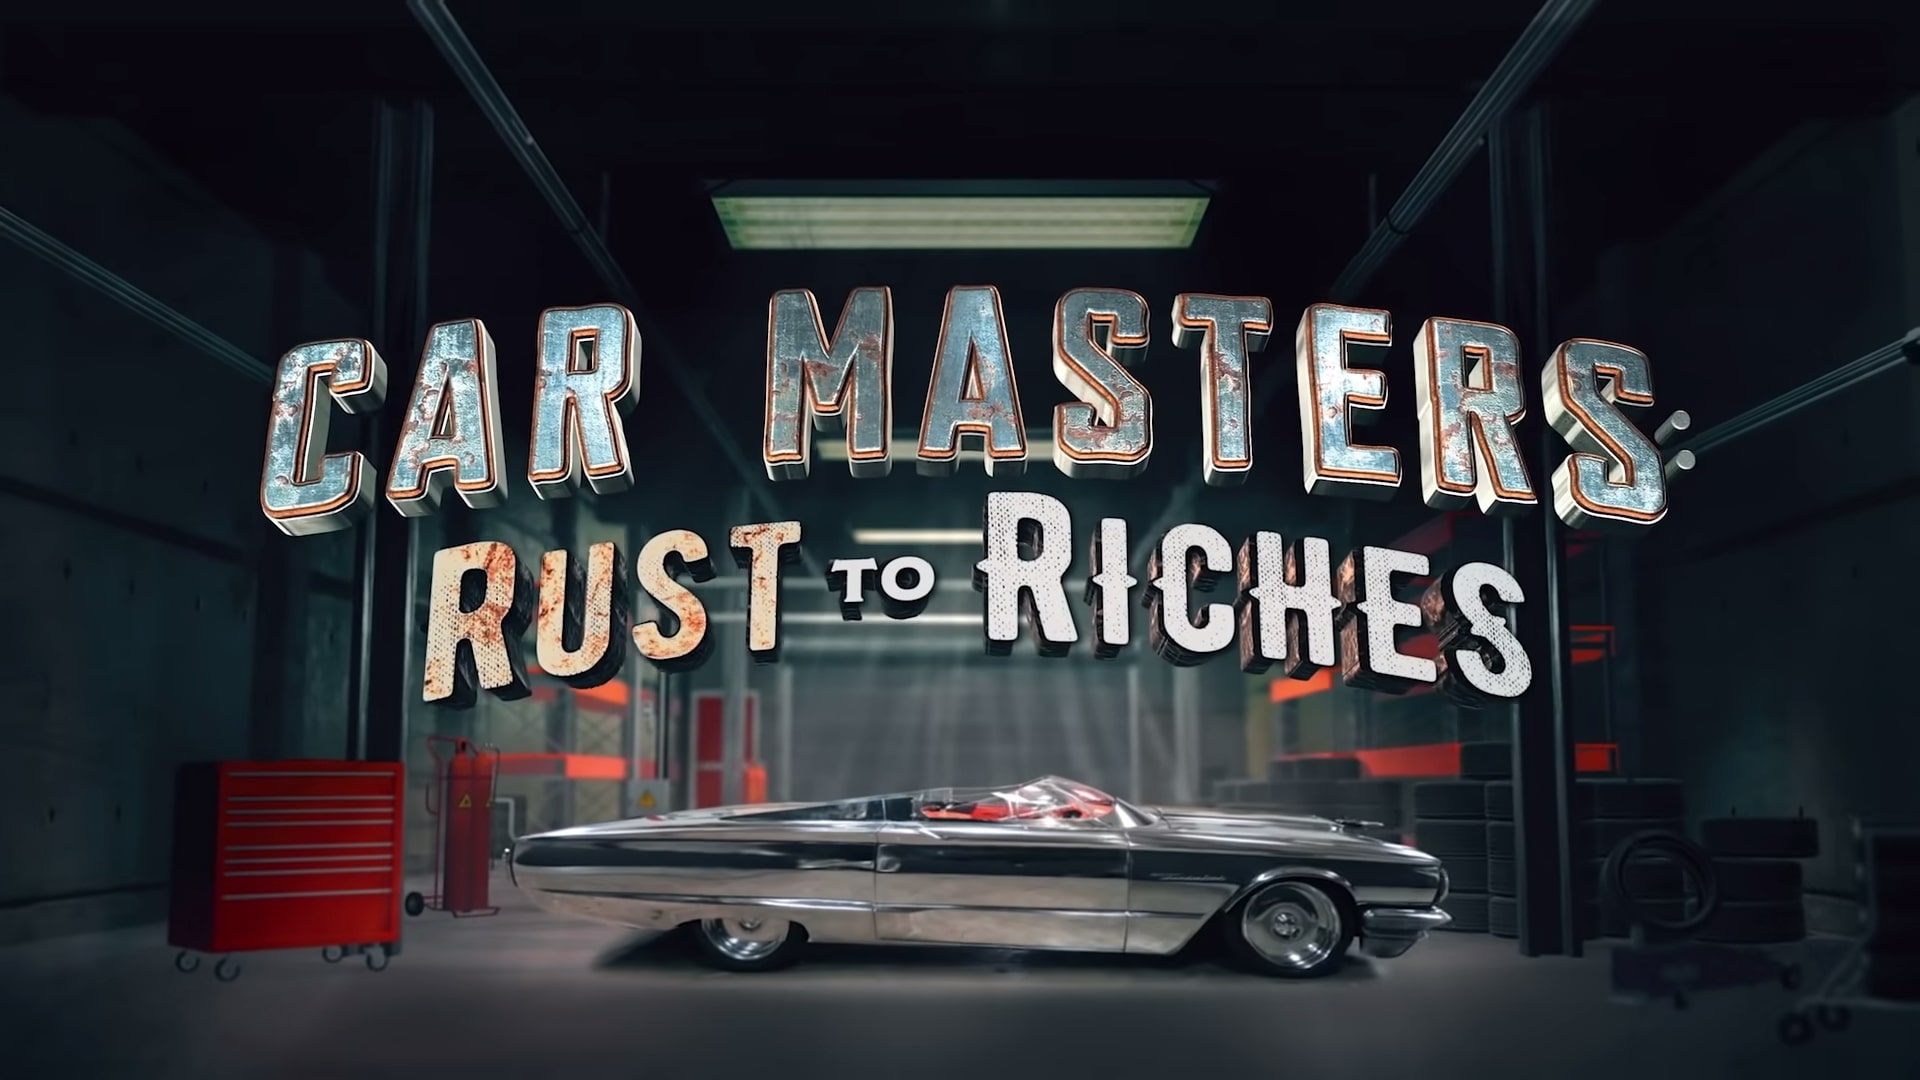 Netflix Car Masters Season 3 Trailer, Coming to Netflix in August 2021